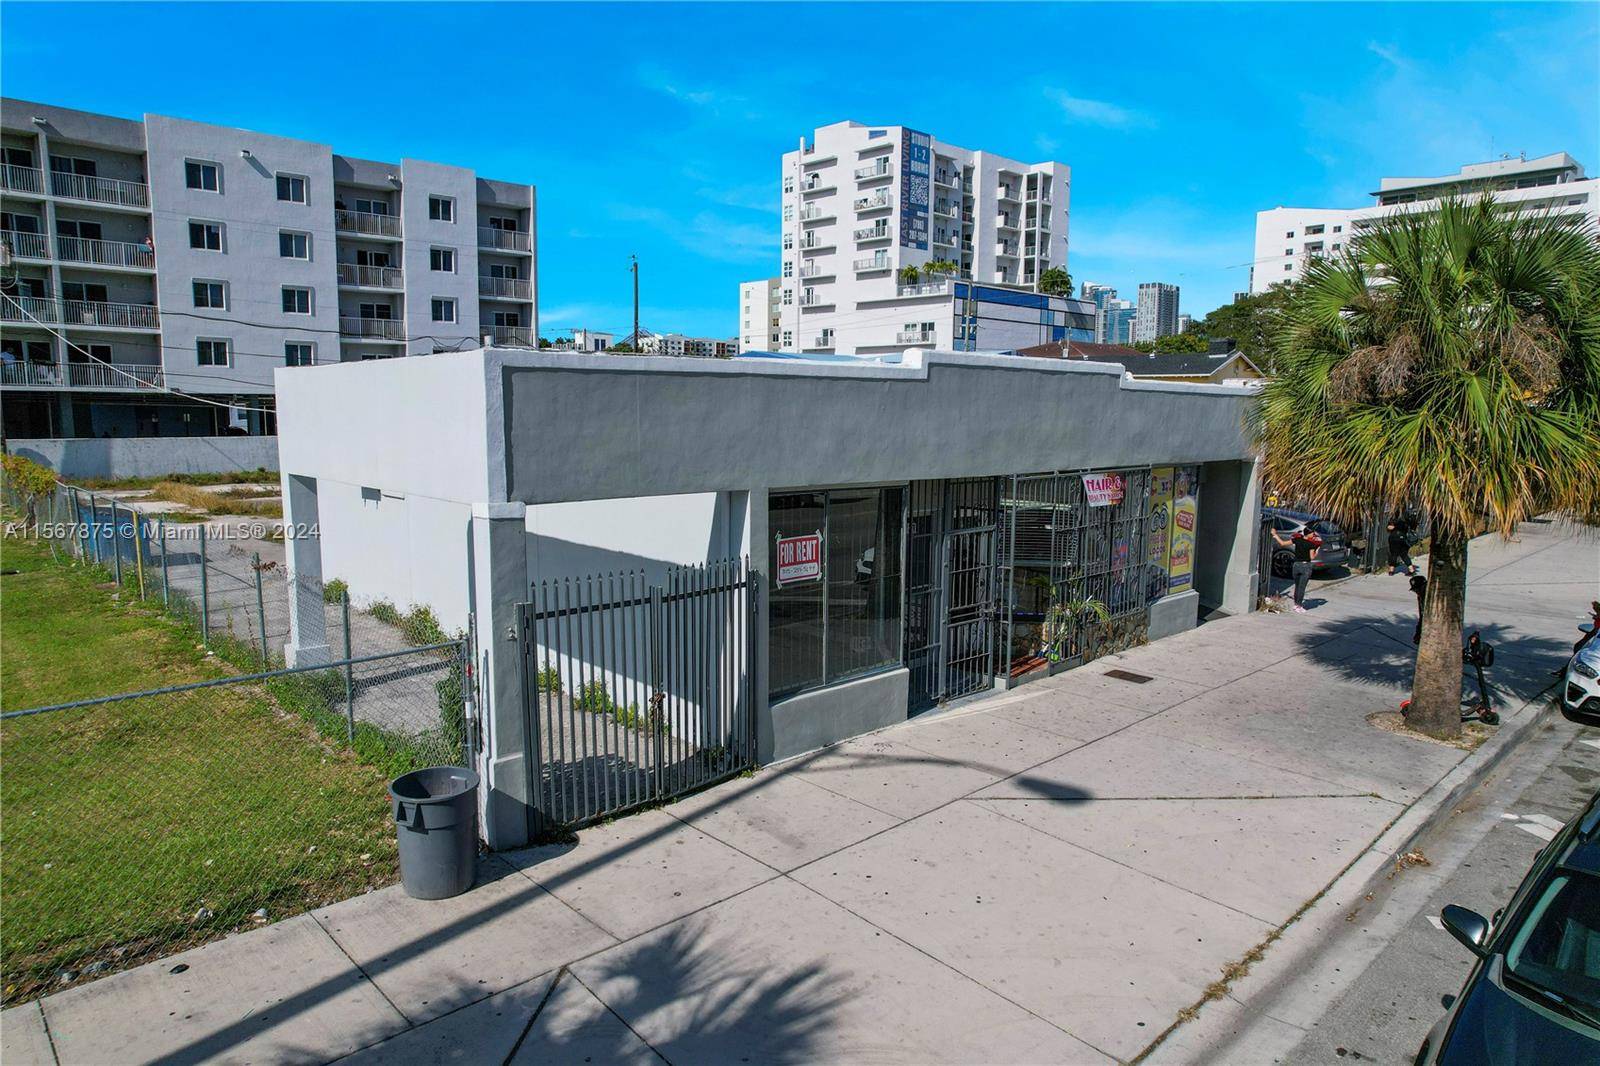 Presenting a prime leasing opportunity in a 3 unit retail property located on bustling W Flagler St.